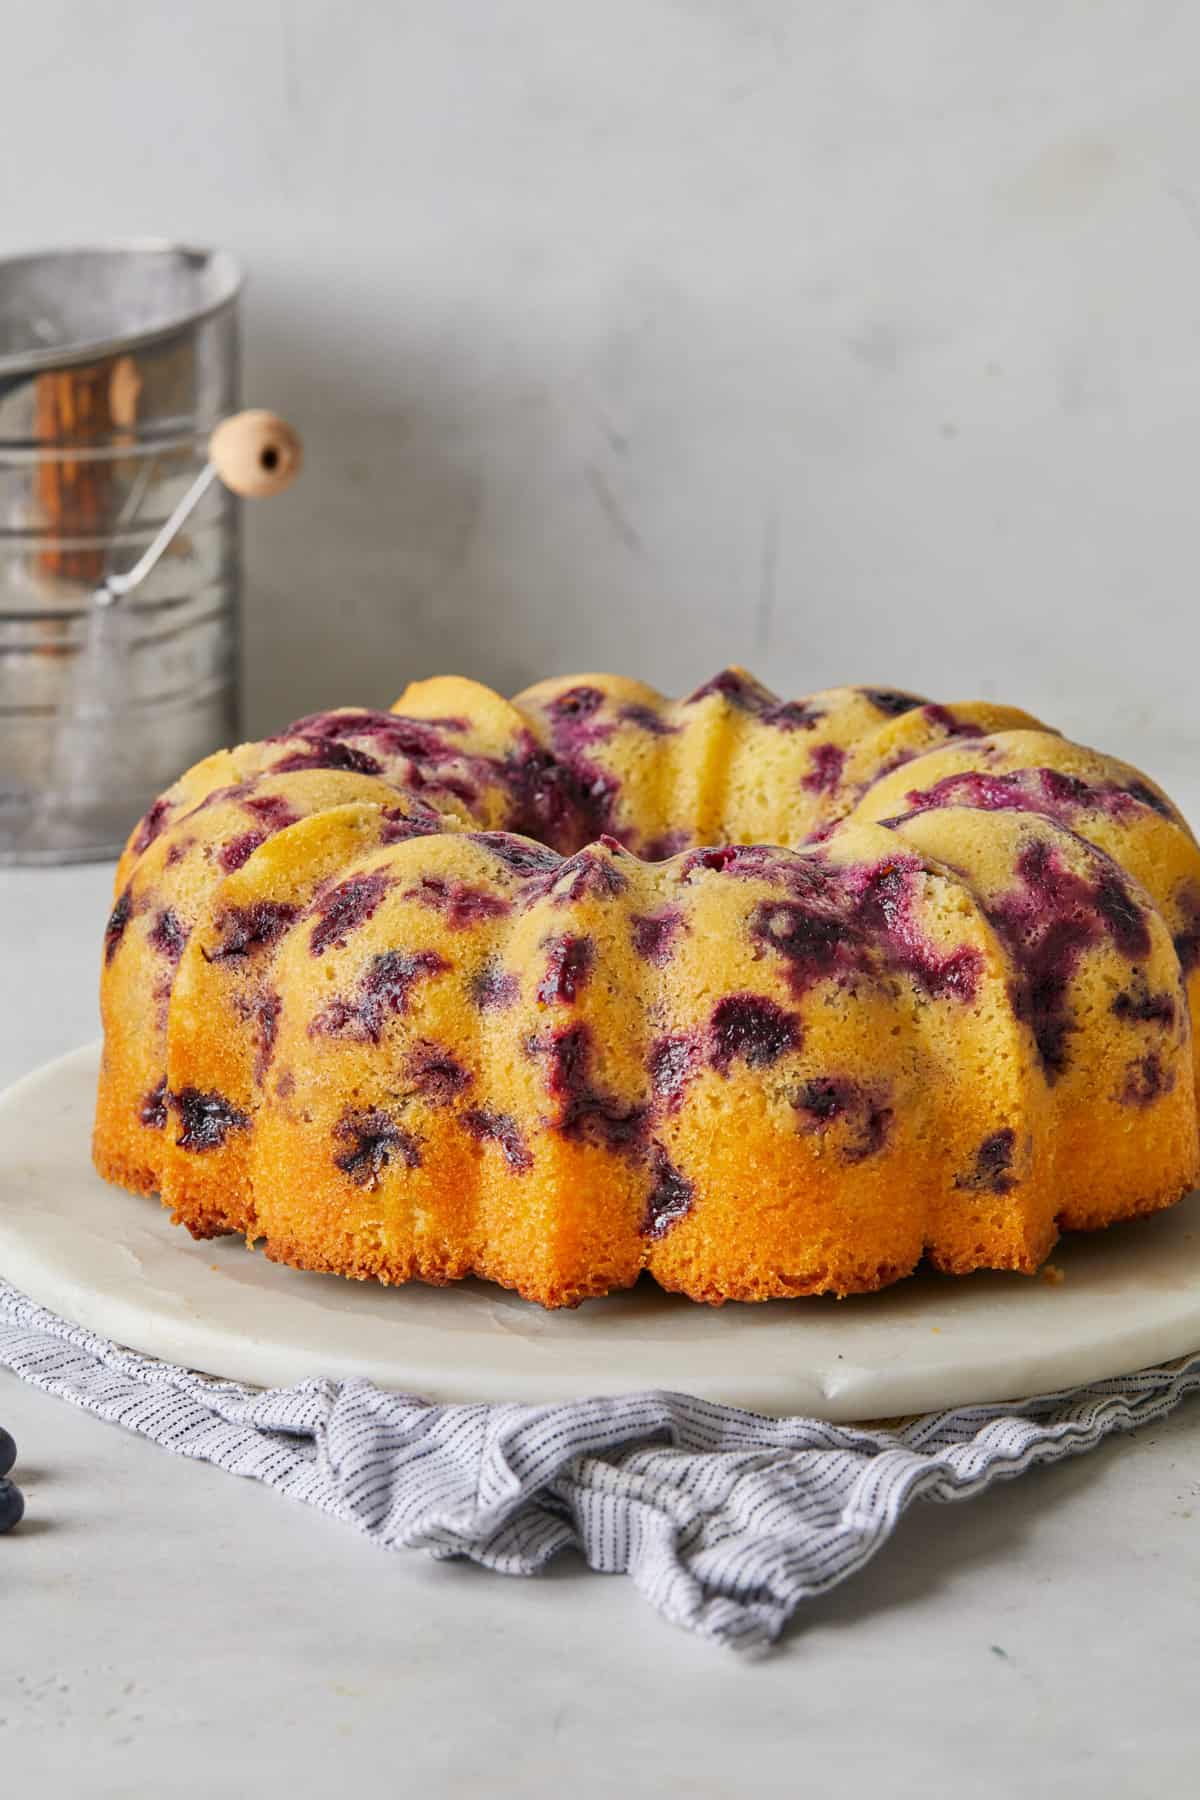 A beautiful bundt cake that's baked with blueberries